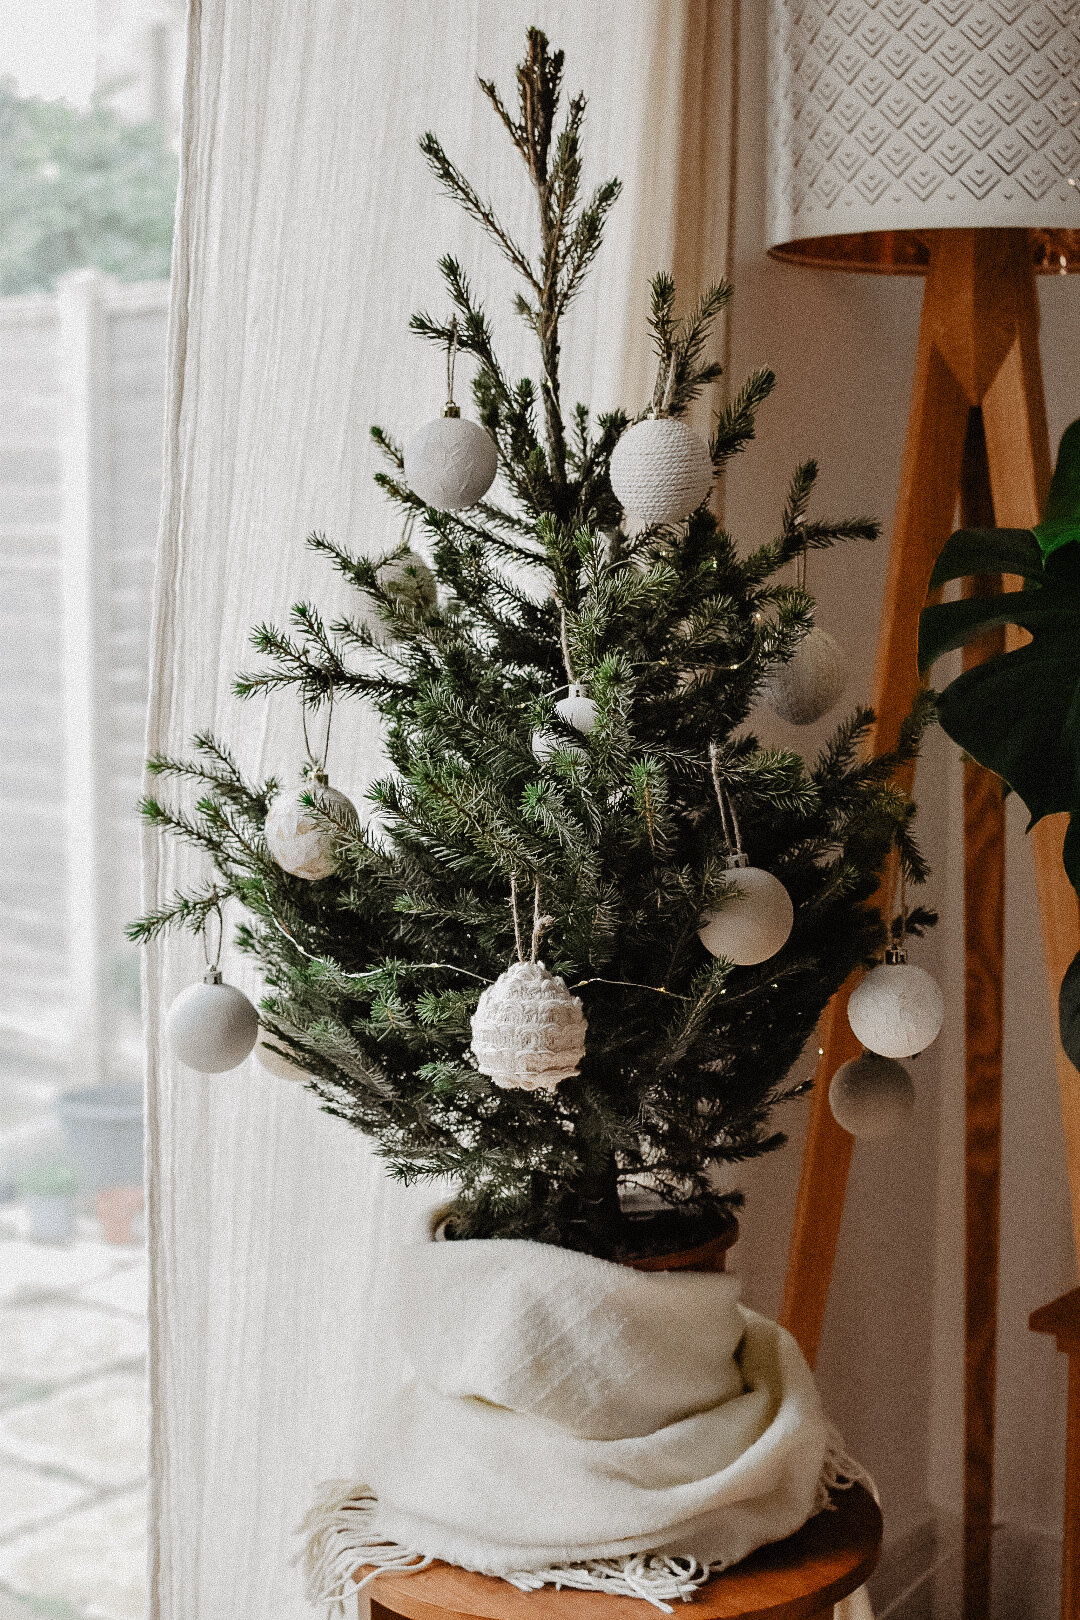 Christmas Craft Ideas that are Upcycled and Repurposed